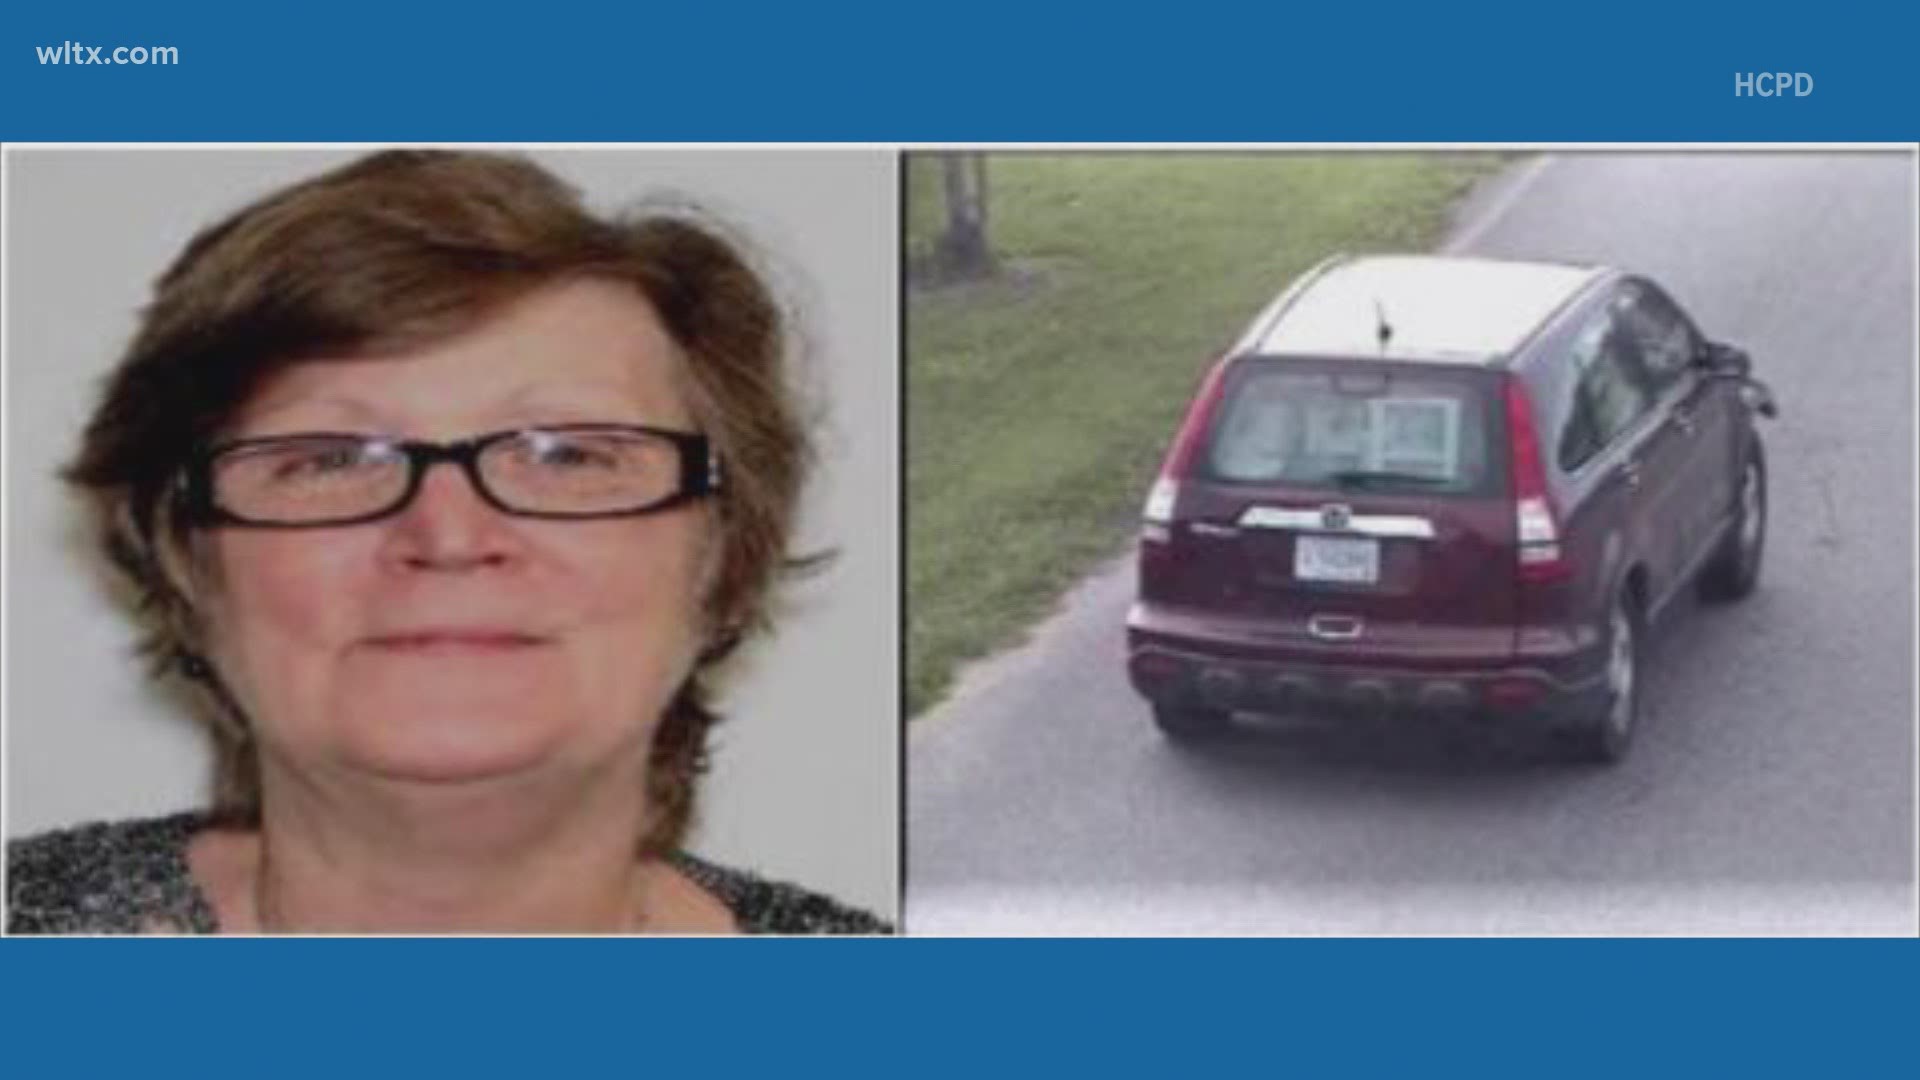 Sandra Lee Barksdale, 56, was last seen on Aug. 10 around 8 p.m. on Greenleaf Drive near Conway.